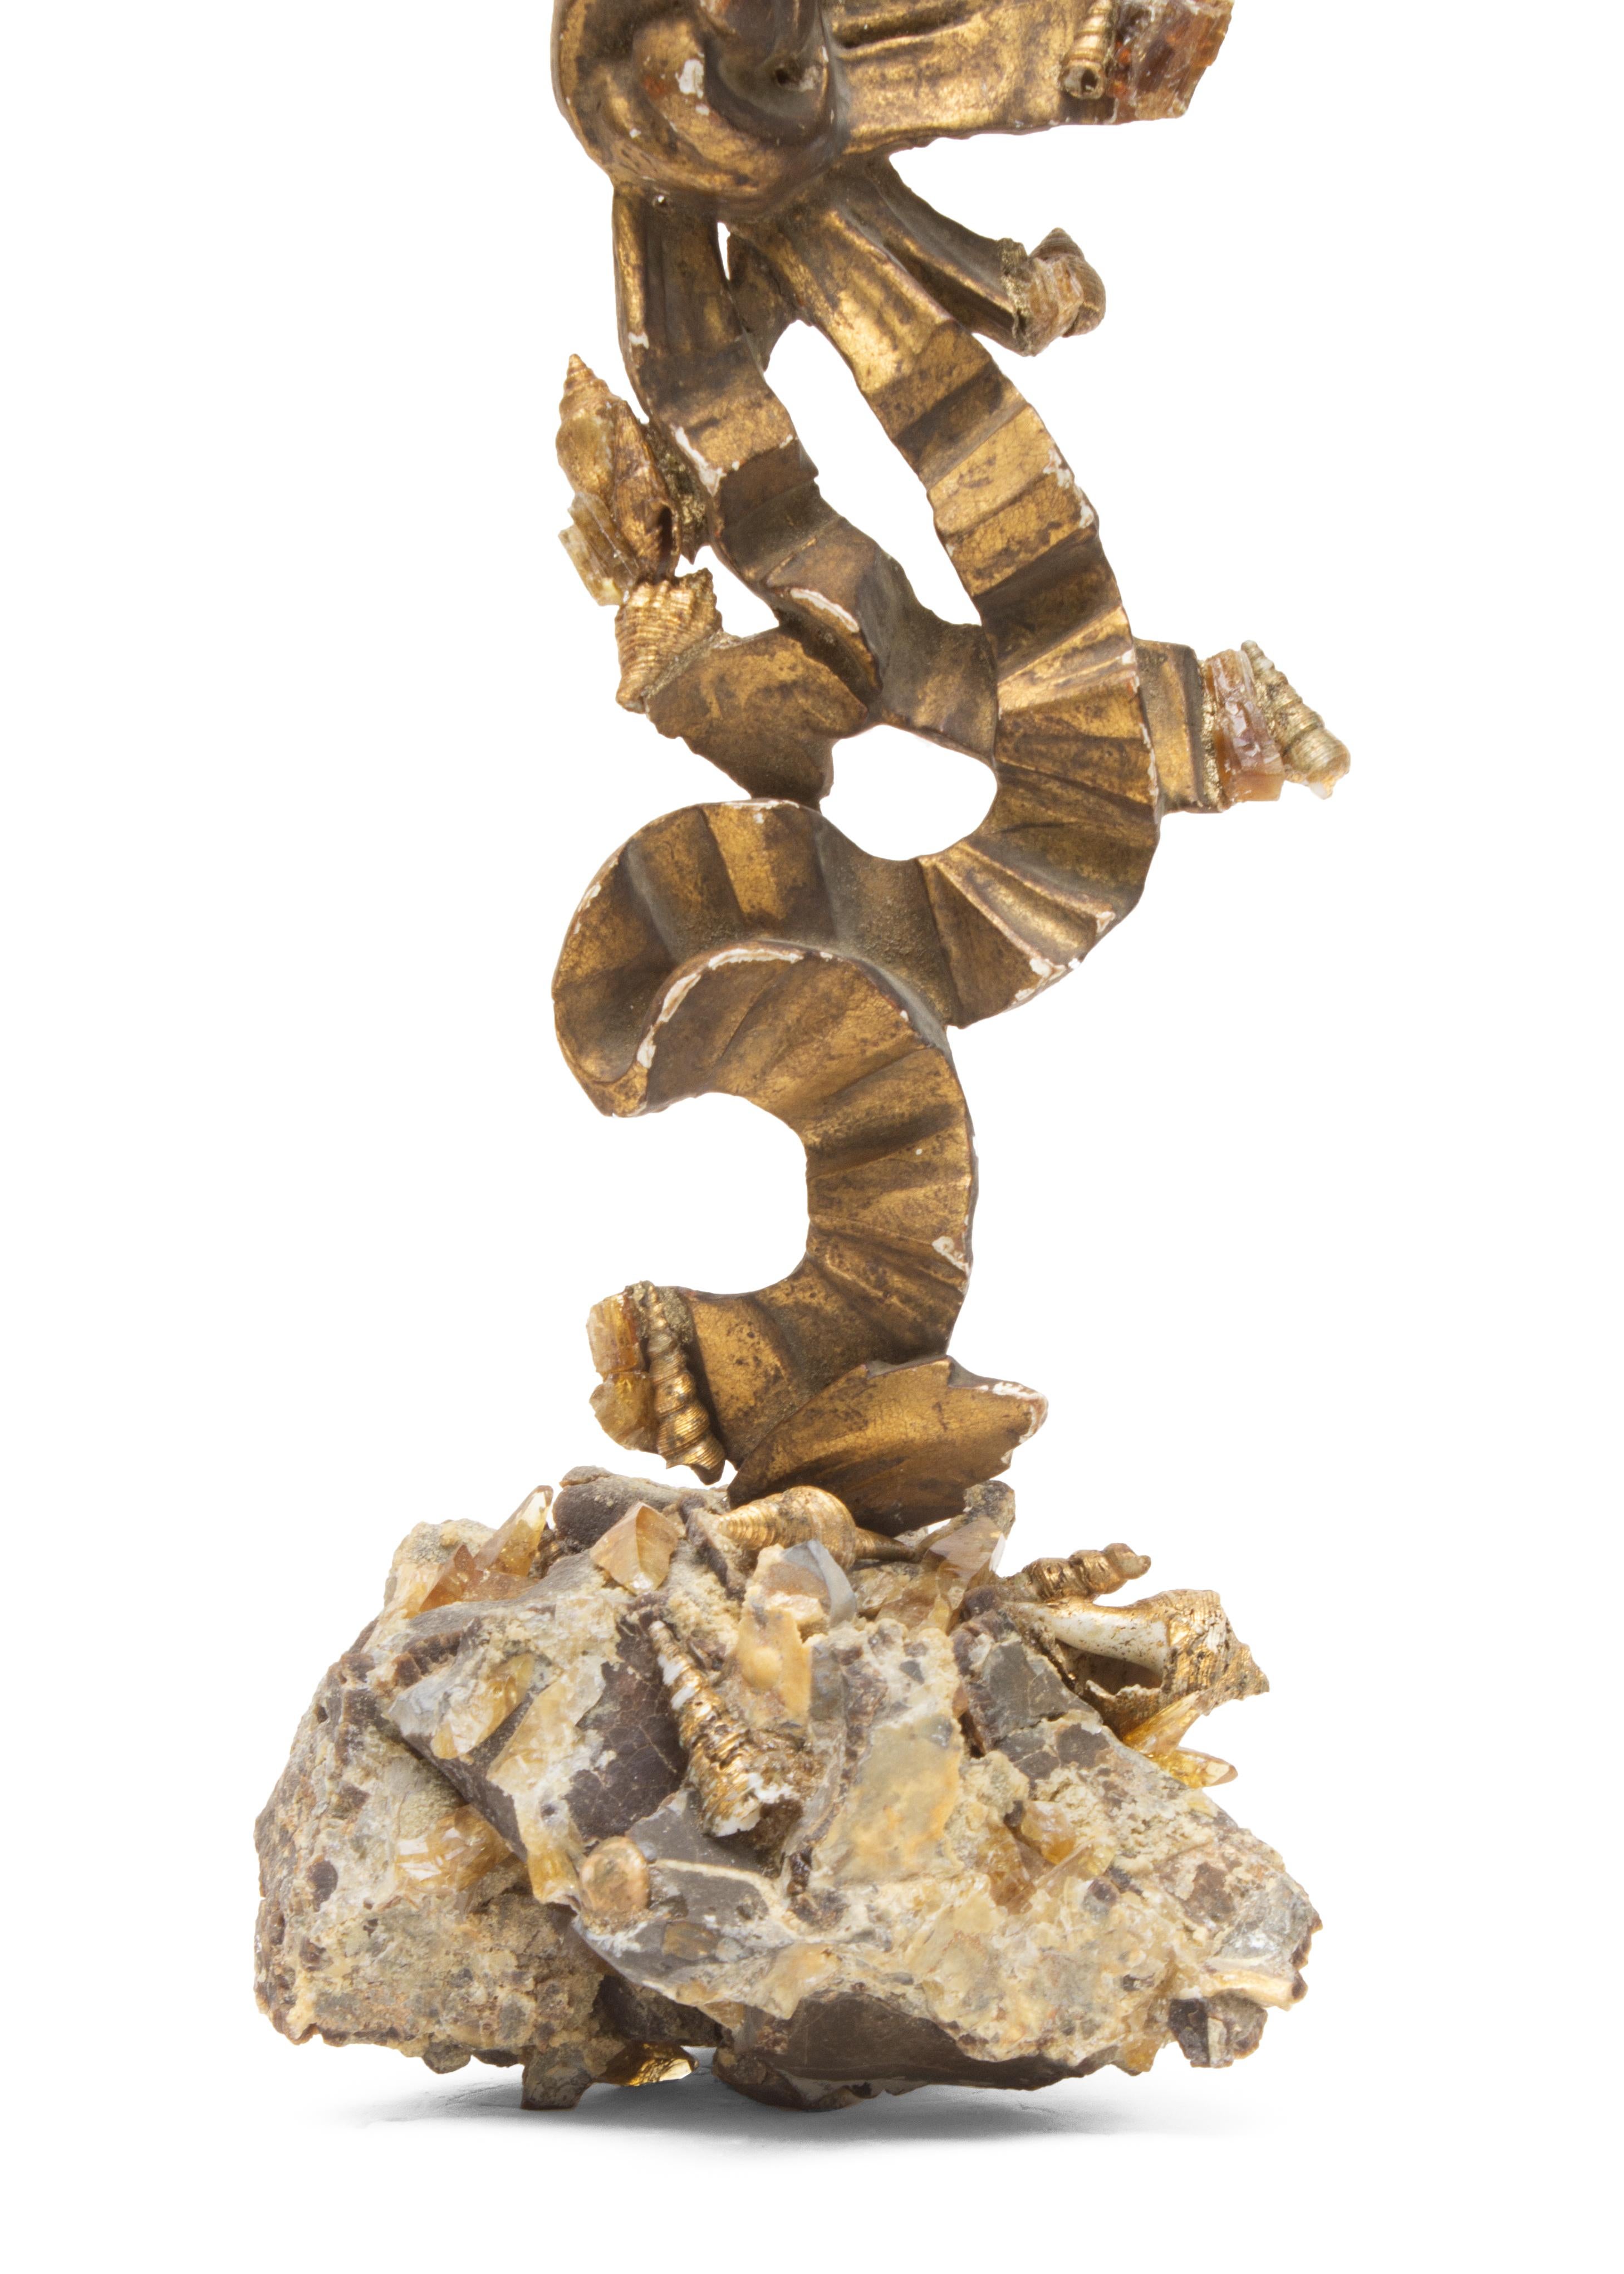 18th century Italian ribbon fragment with barite crystals and gold leaf shells on a matrix with double terminated golden barite crystals from Elk Creek Meade, South Dakota. This is a rare form of barite that gets its rich honey color from both short